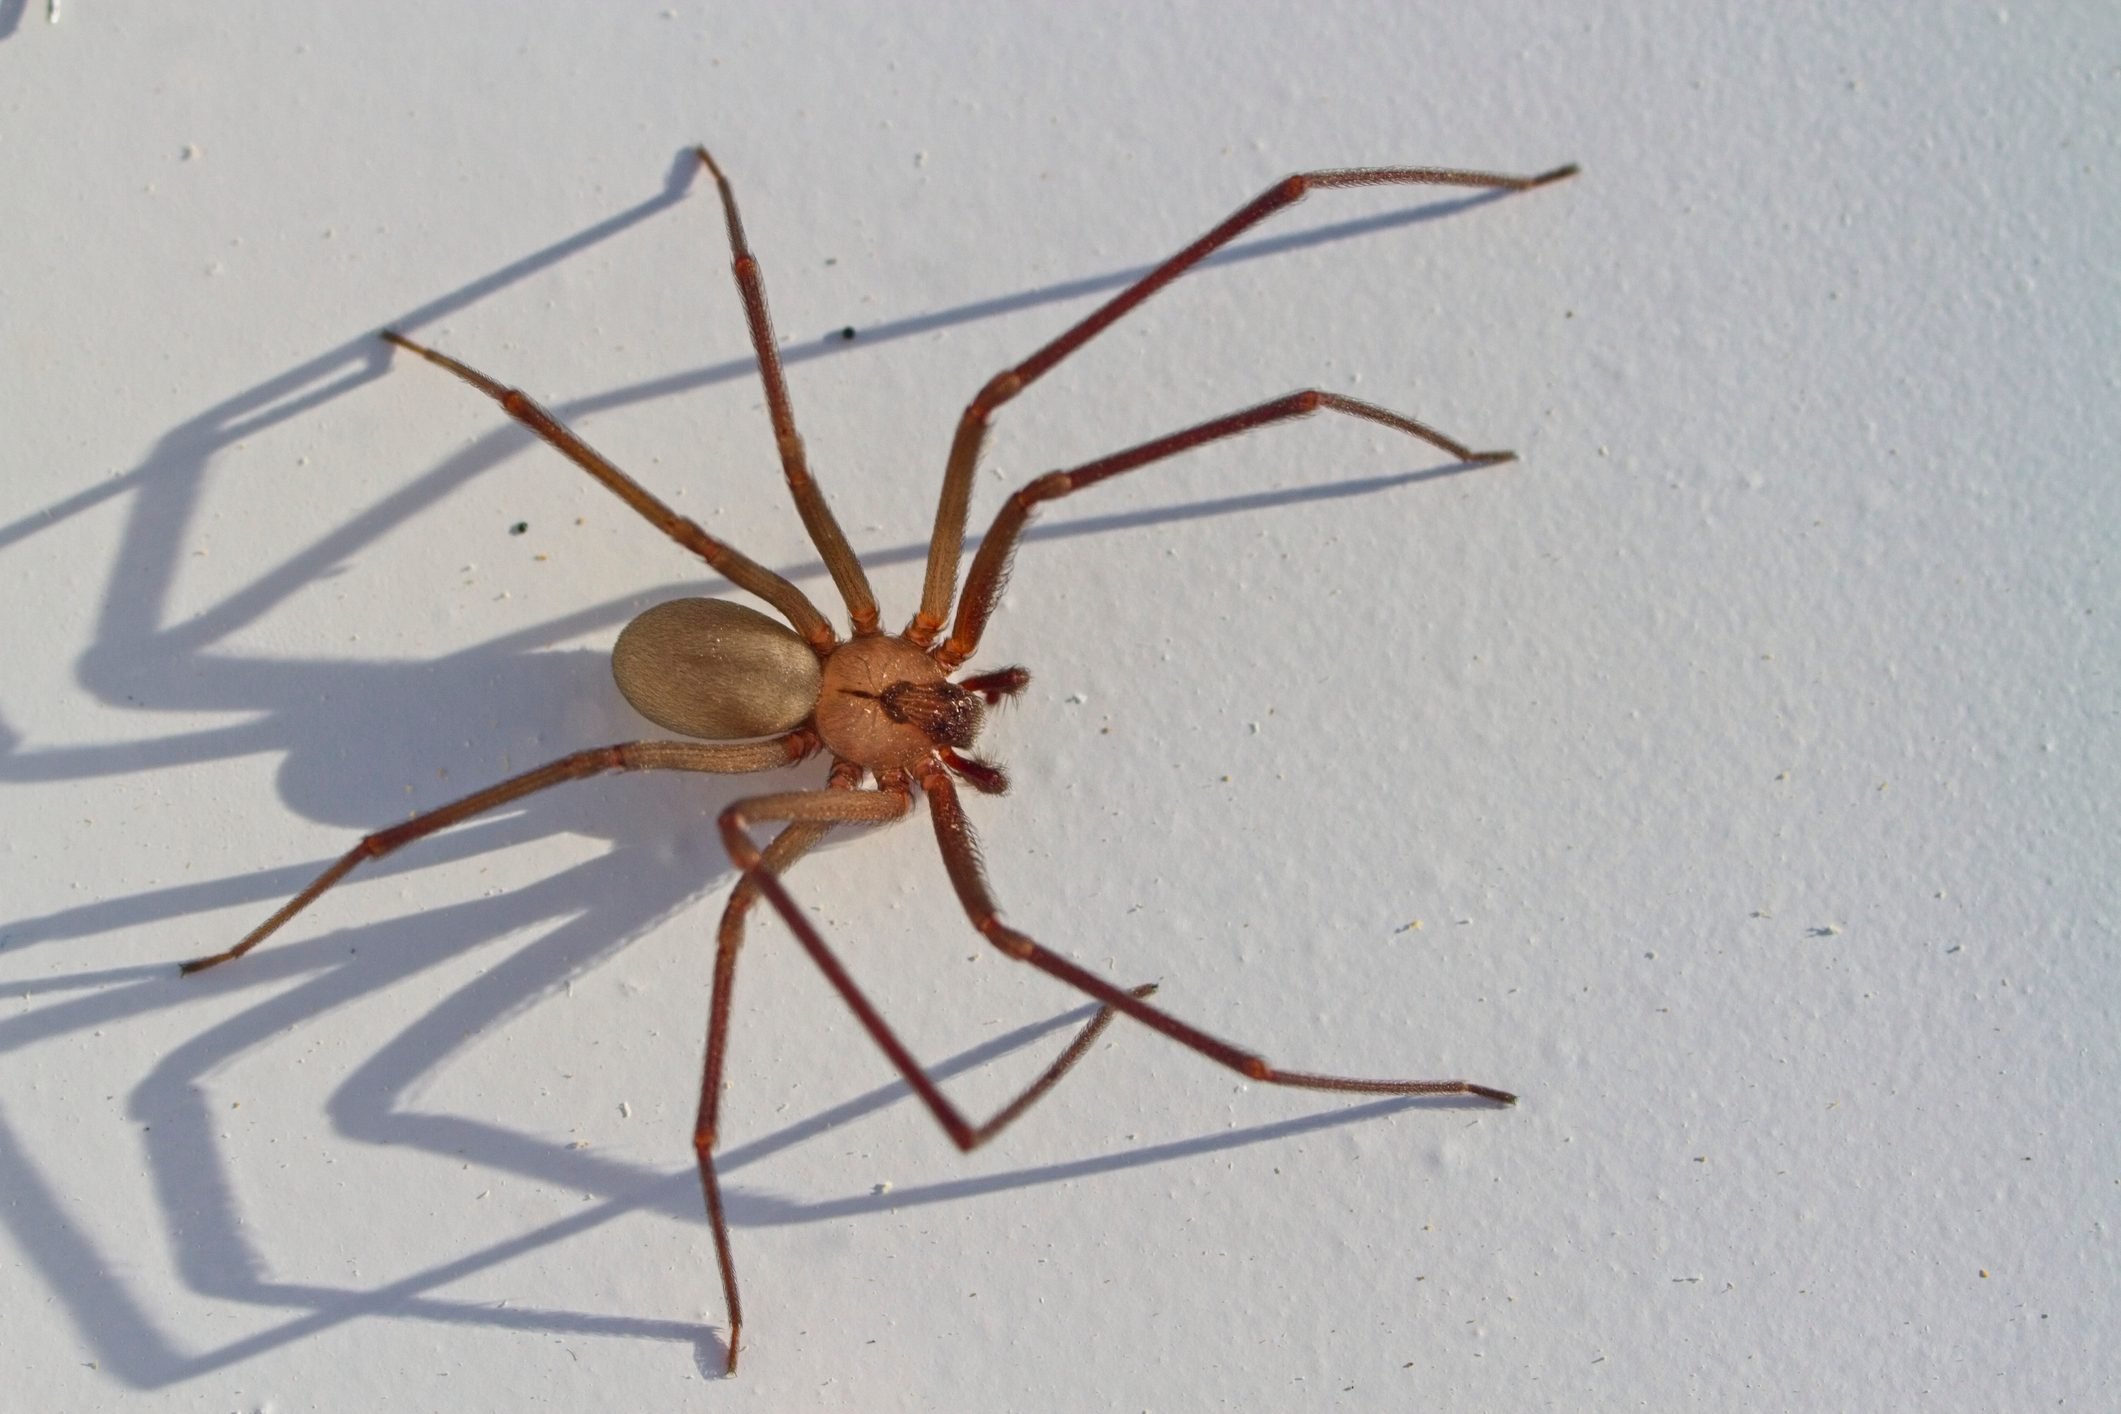 How to Identify and Treat Recluse (Fiddleback) Spider Bites